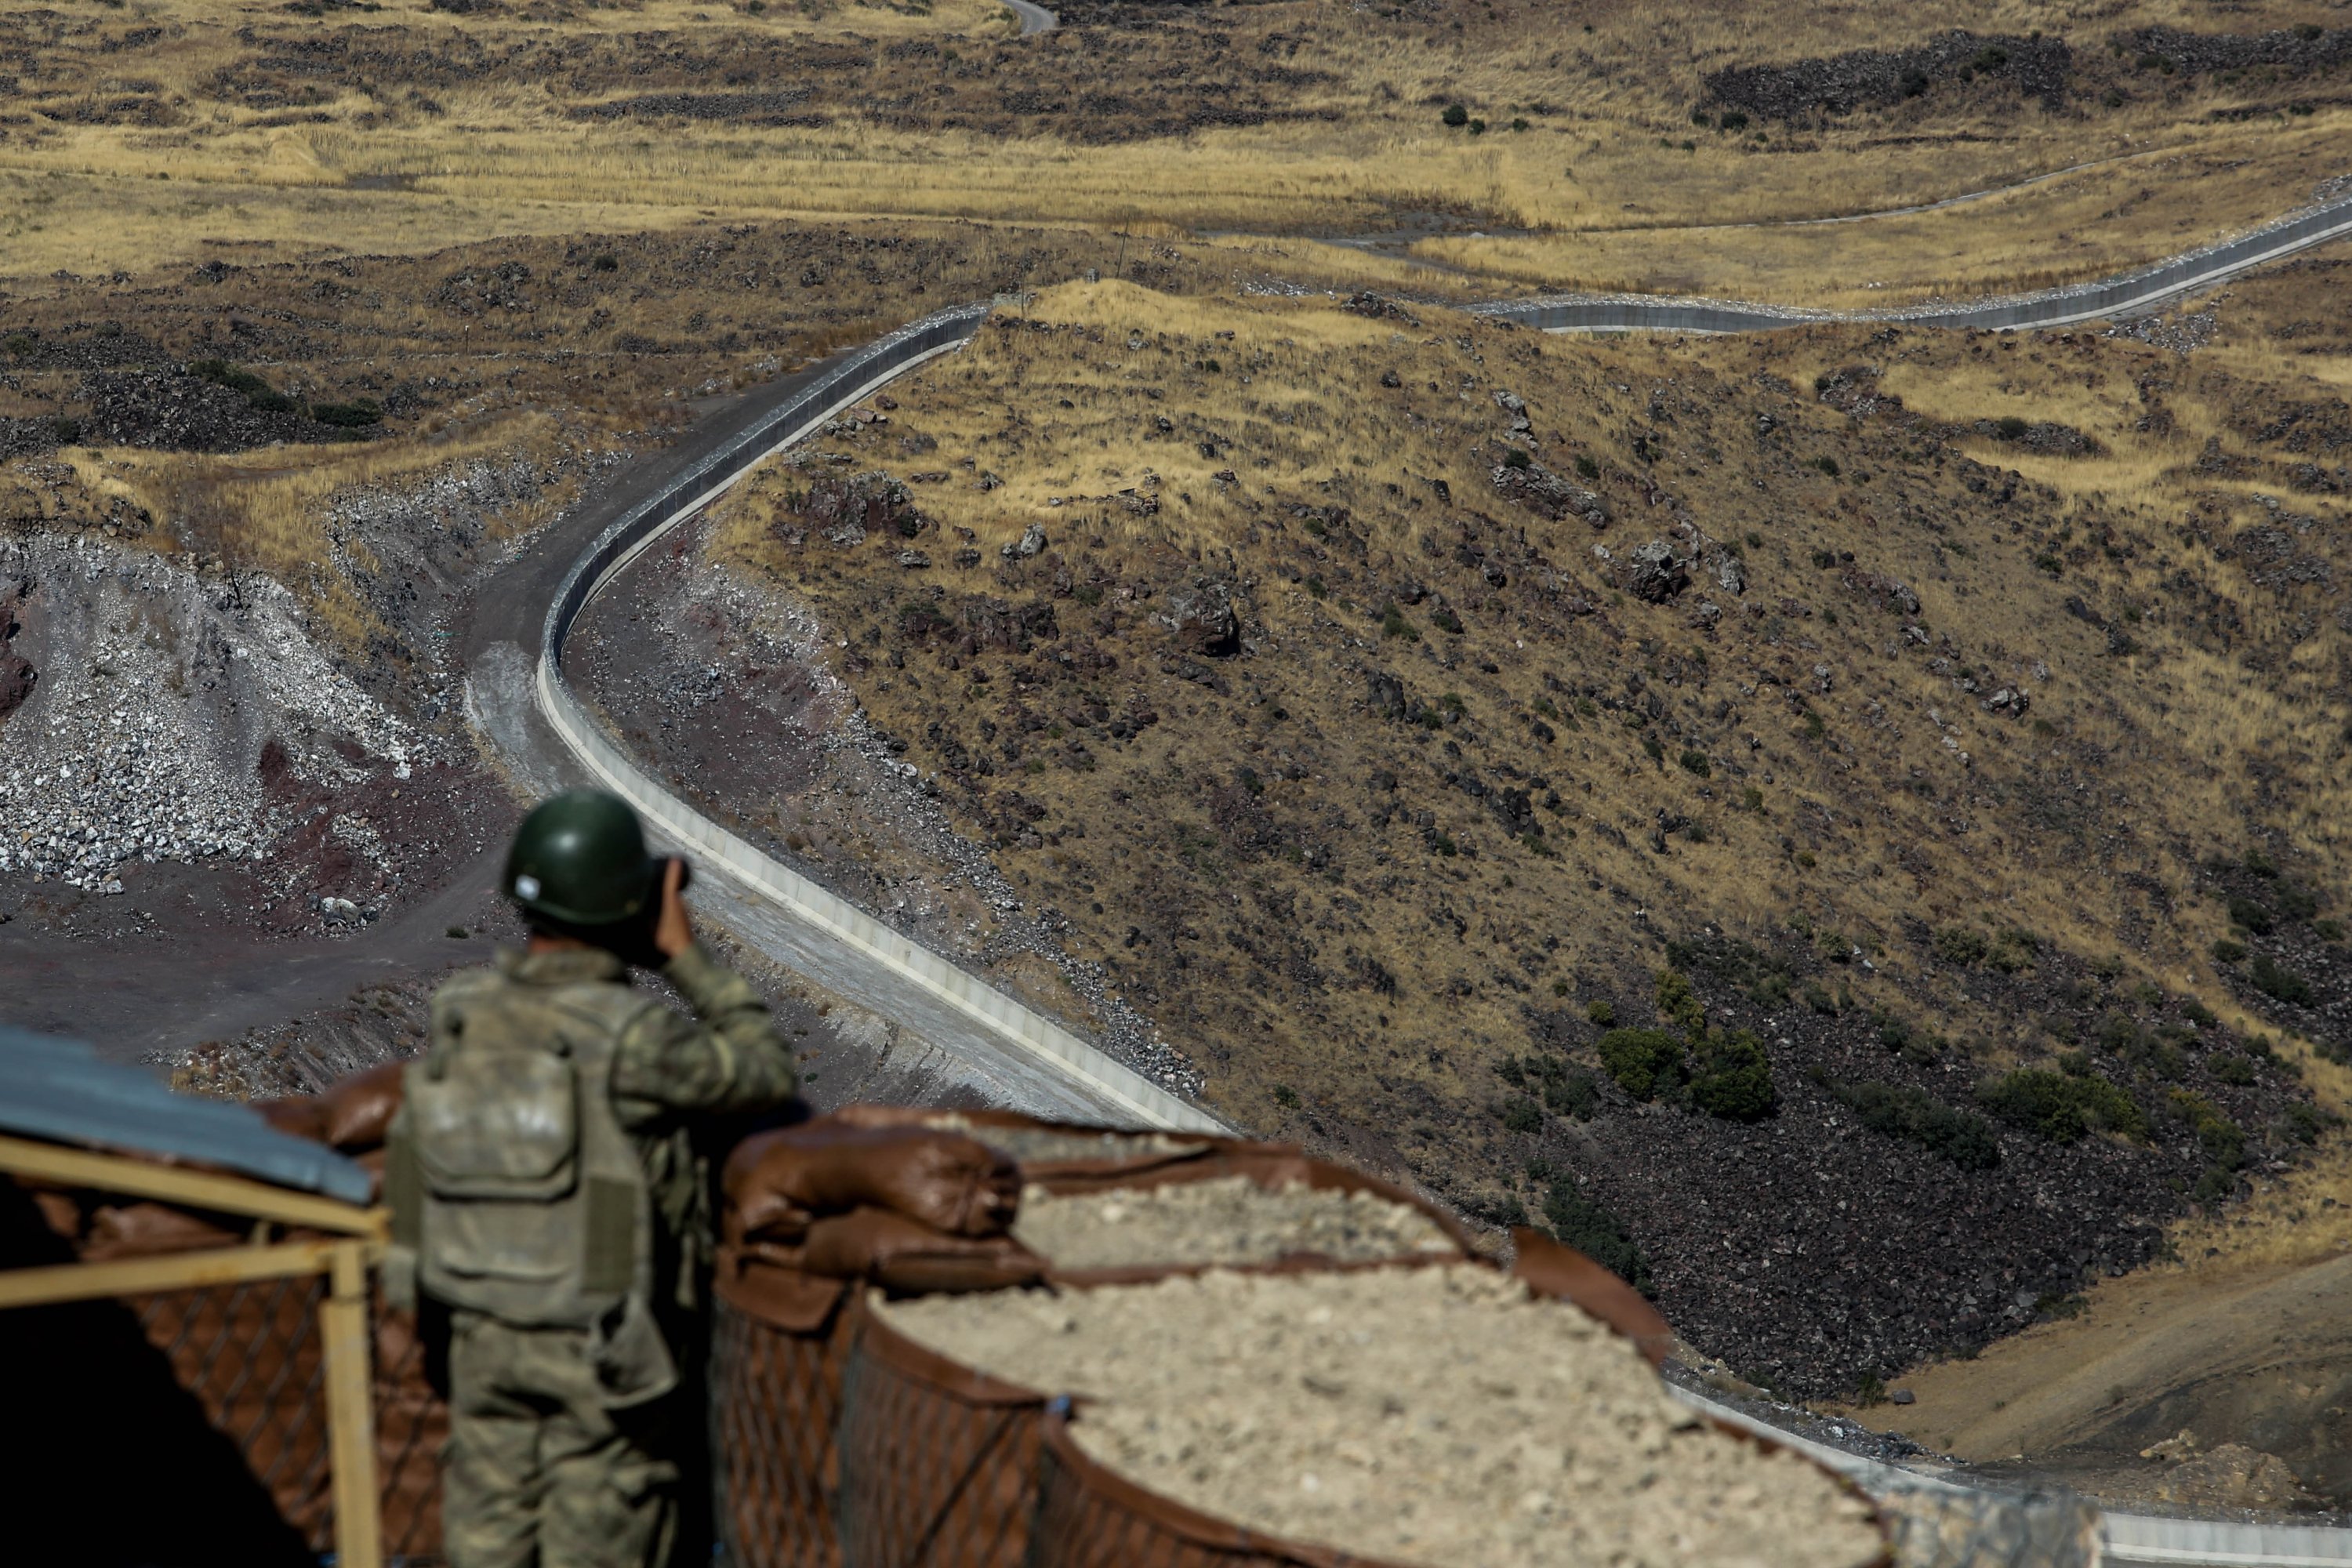 Turkish security forces monitor the eastern border with Iran, Van, Turkey, Aug. 19, 2021. (Sabah Photo)